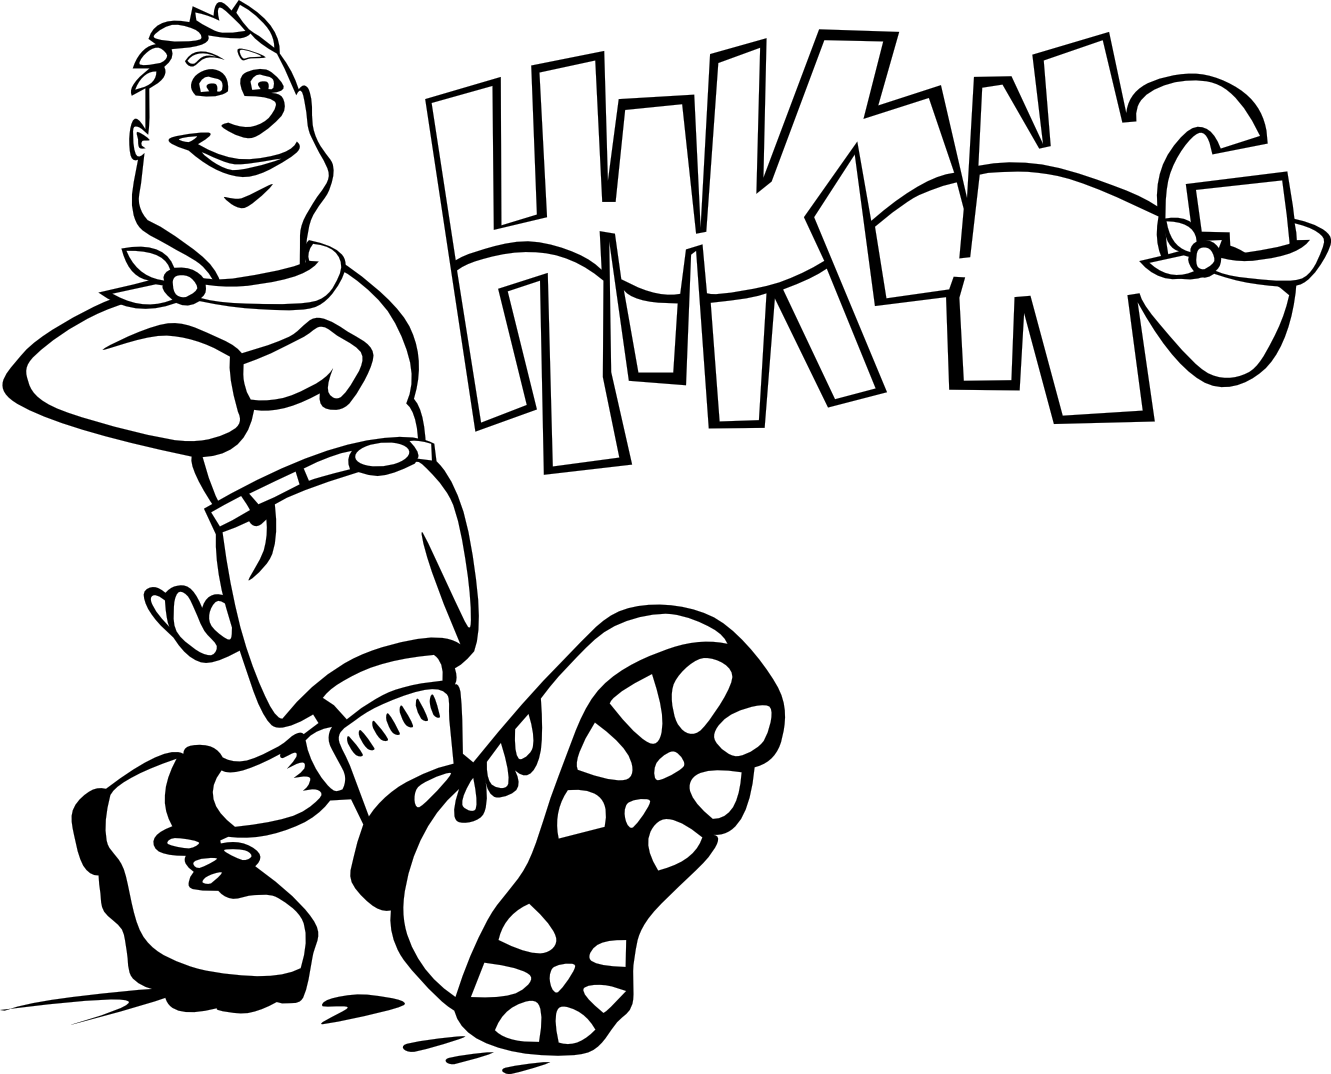 Hiking clipart free images